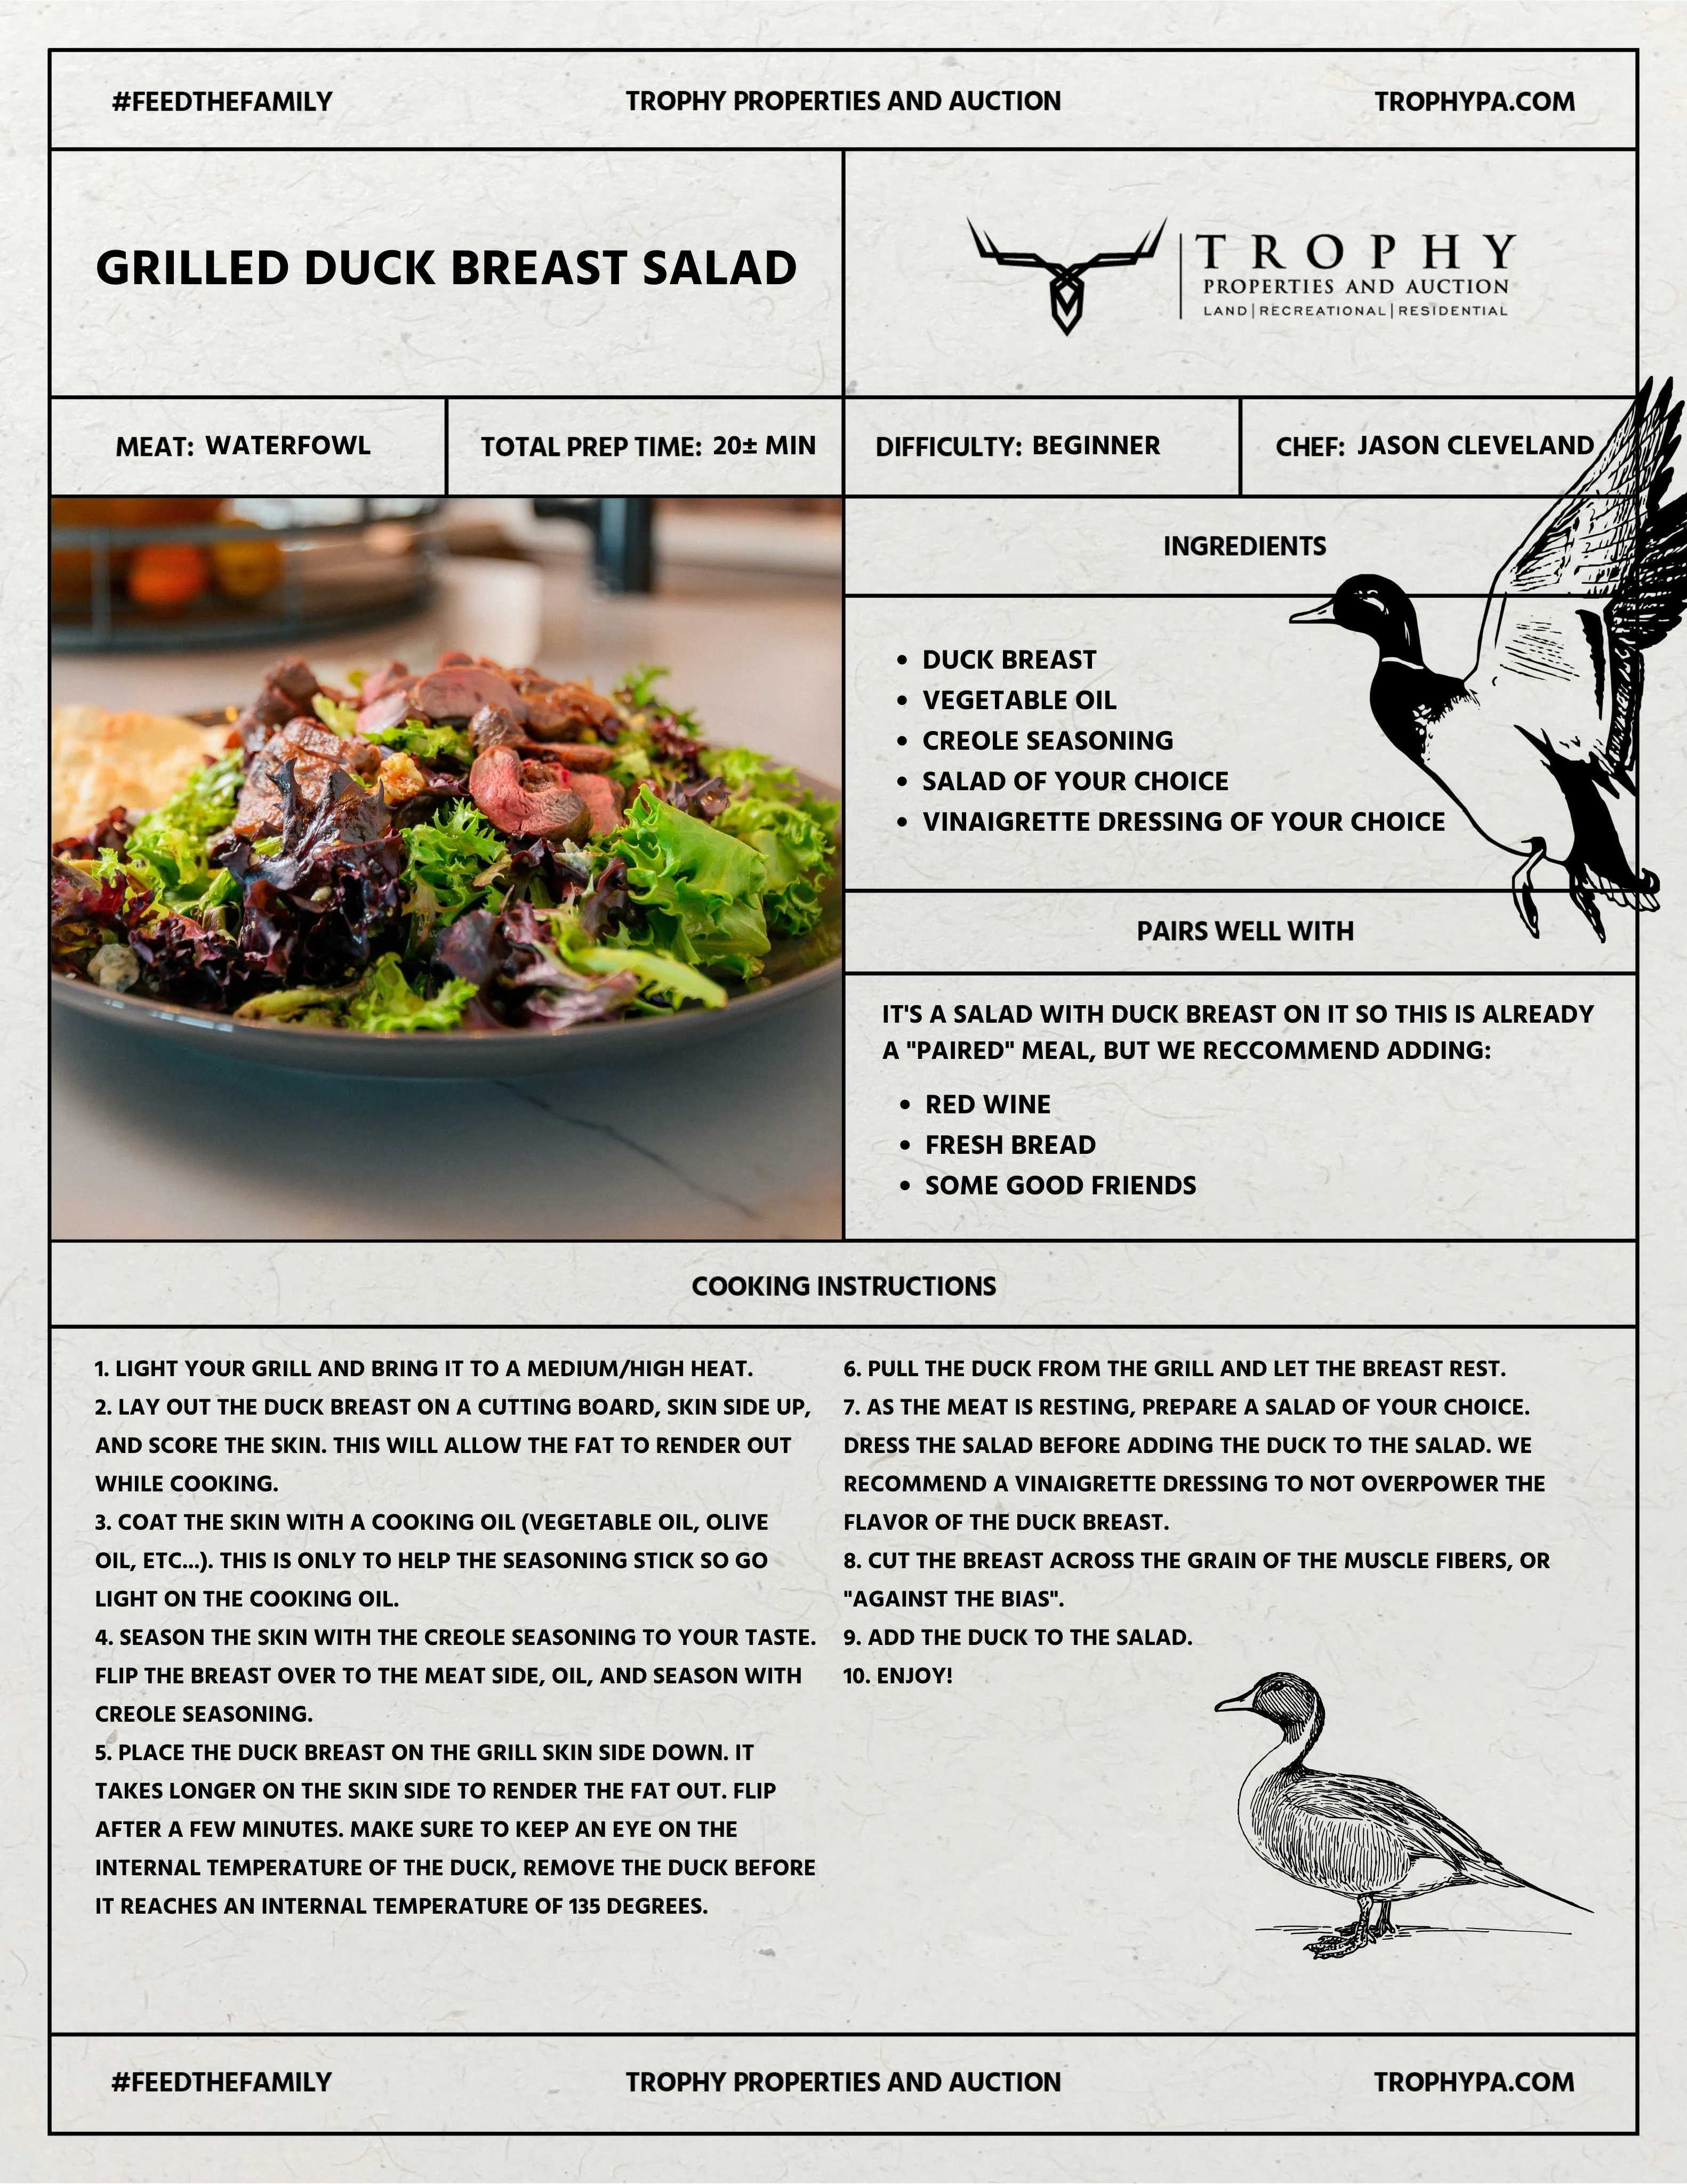 GRILLED DUCK BREAST SALAD